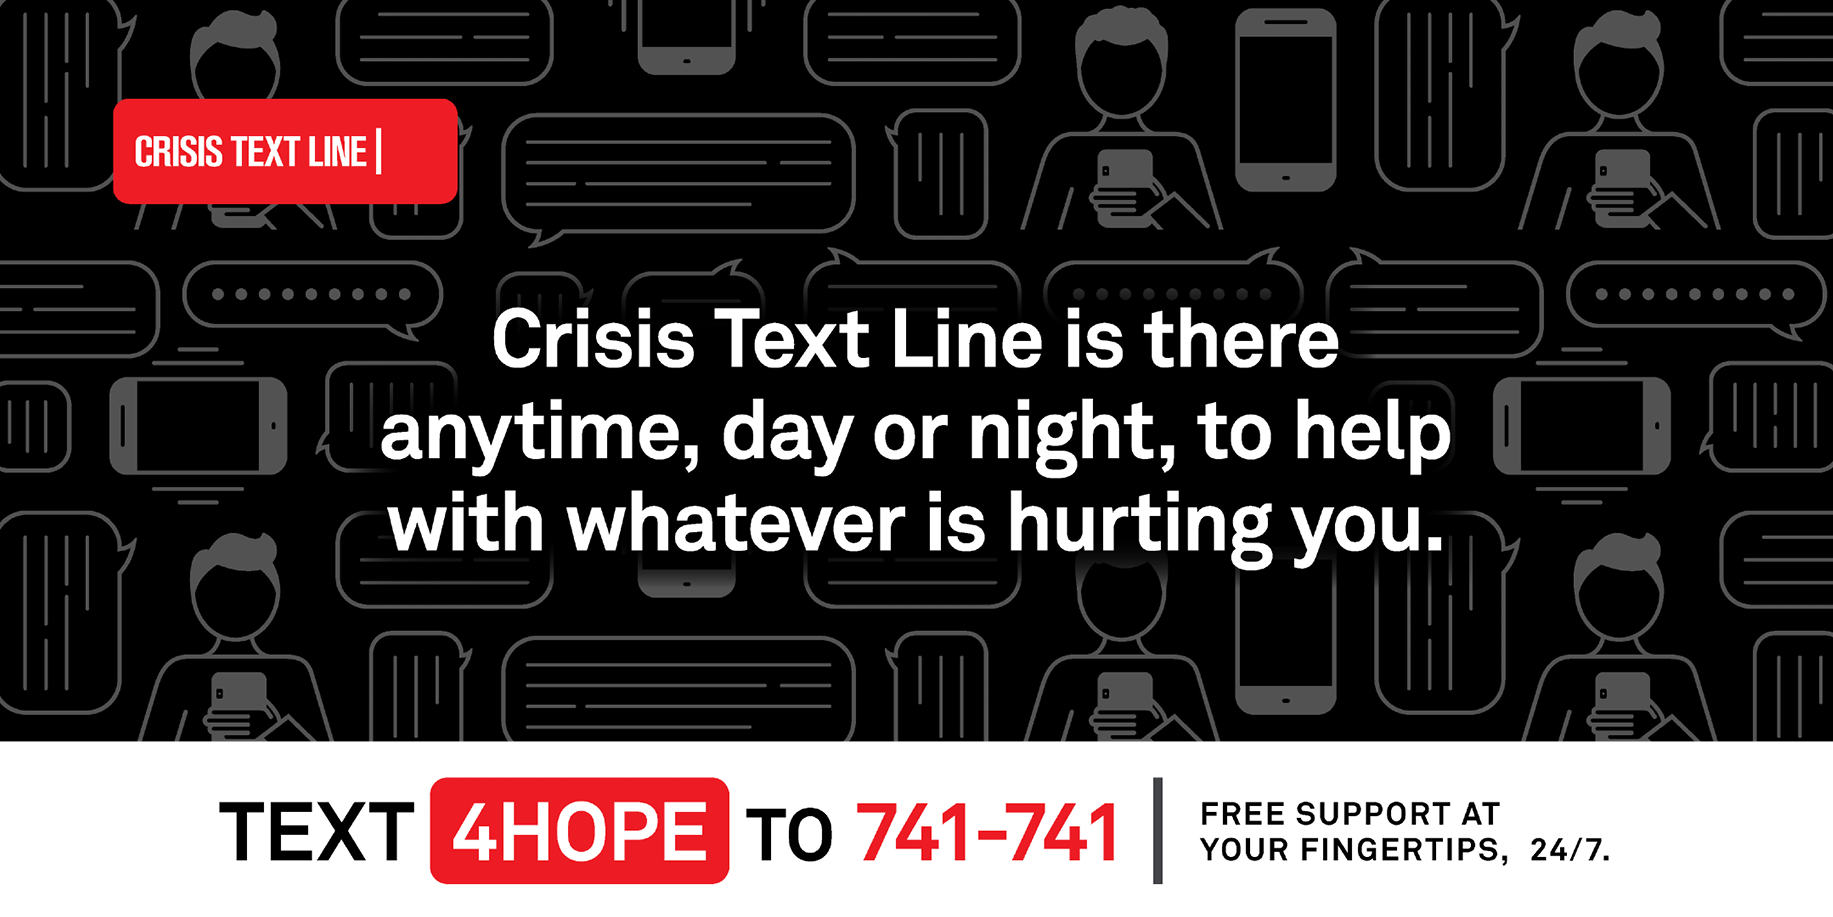 TEXT 4HOPE TO 741-741 INFO